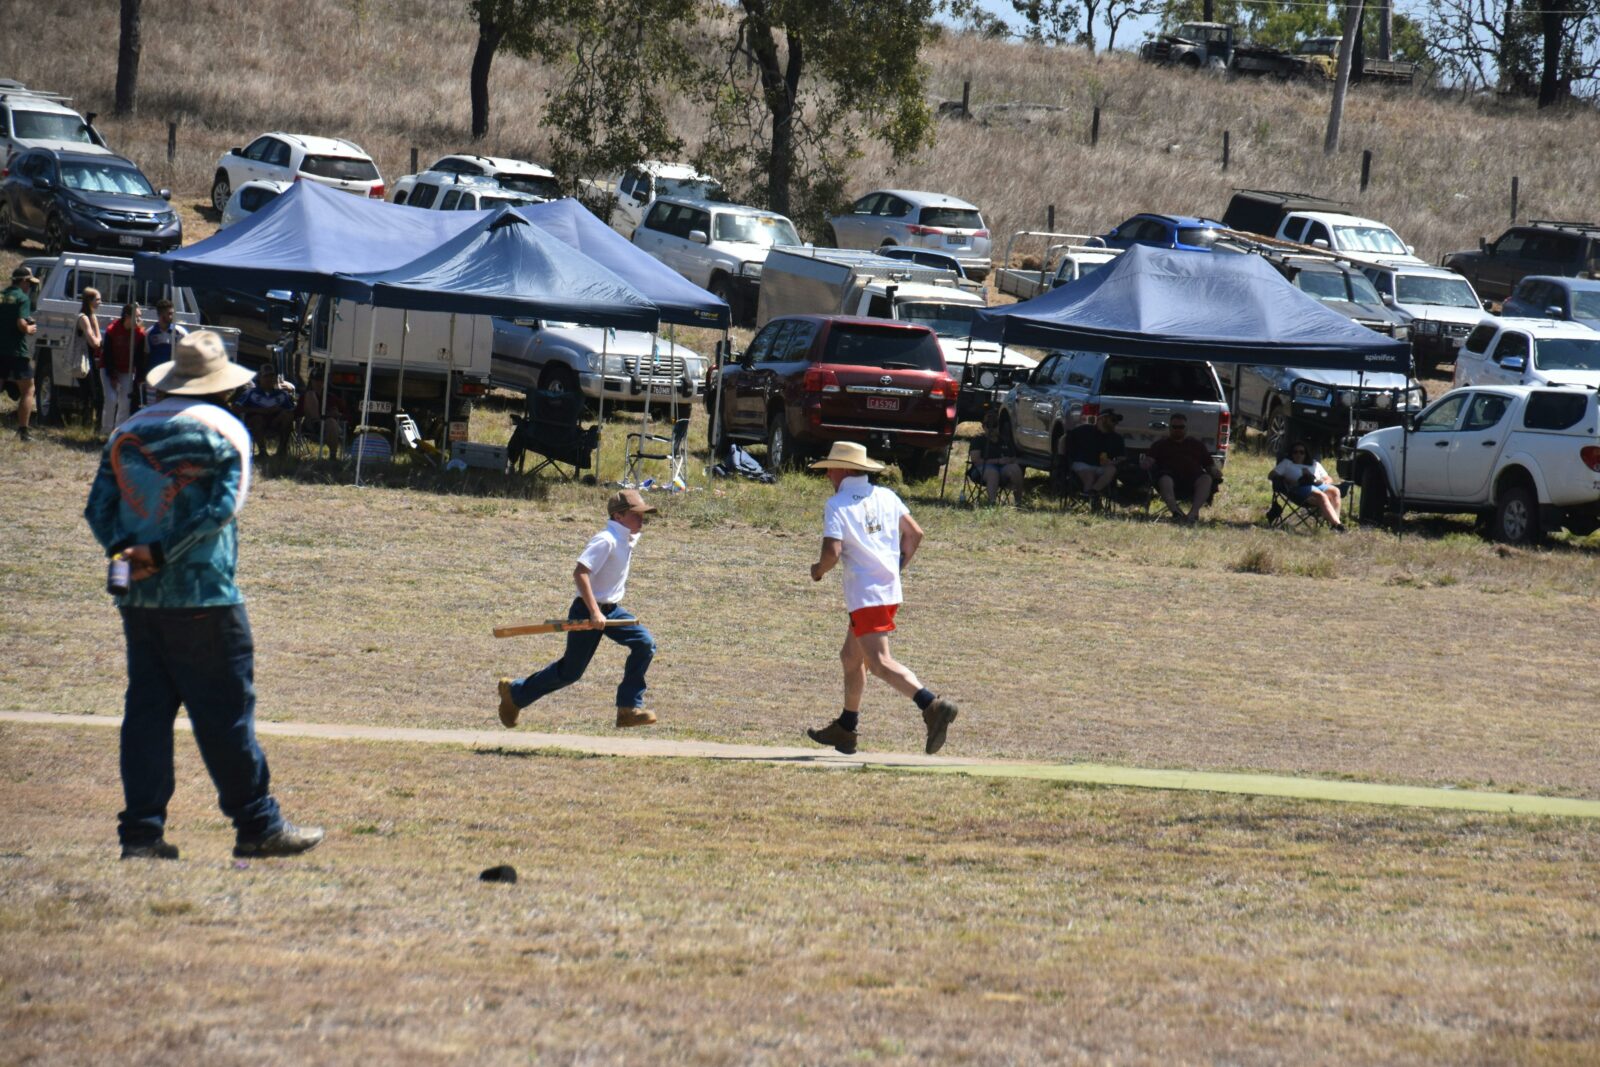 Father and son making runs